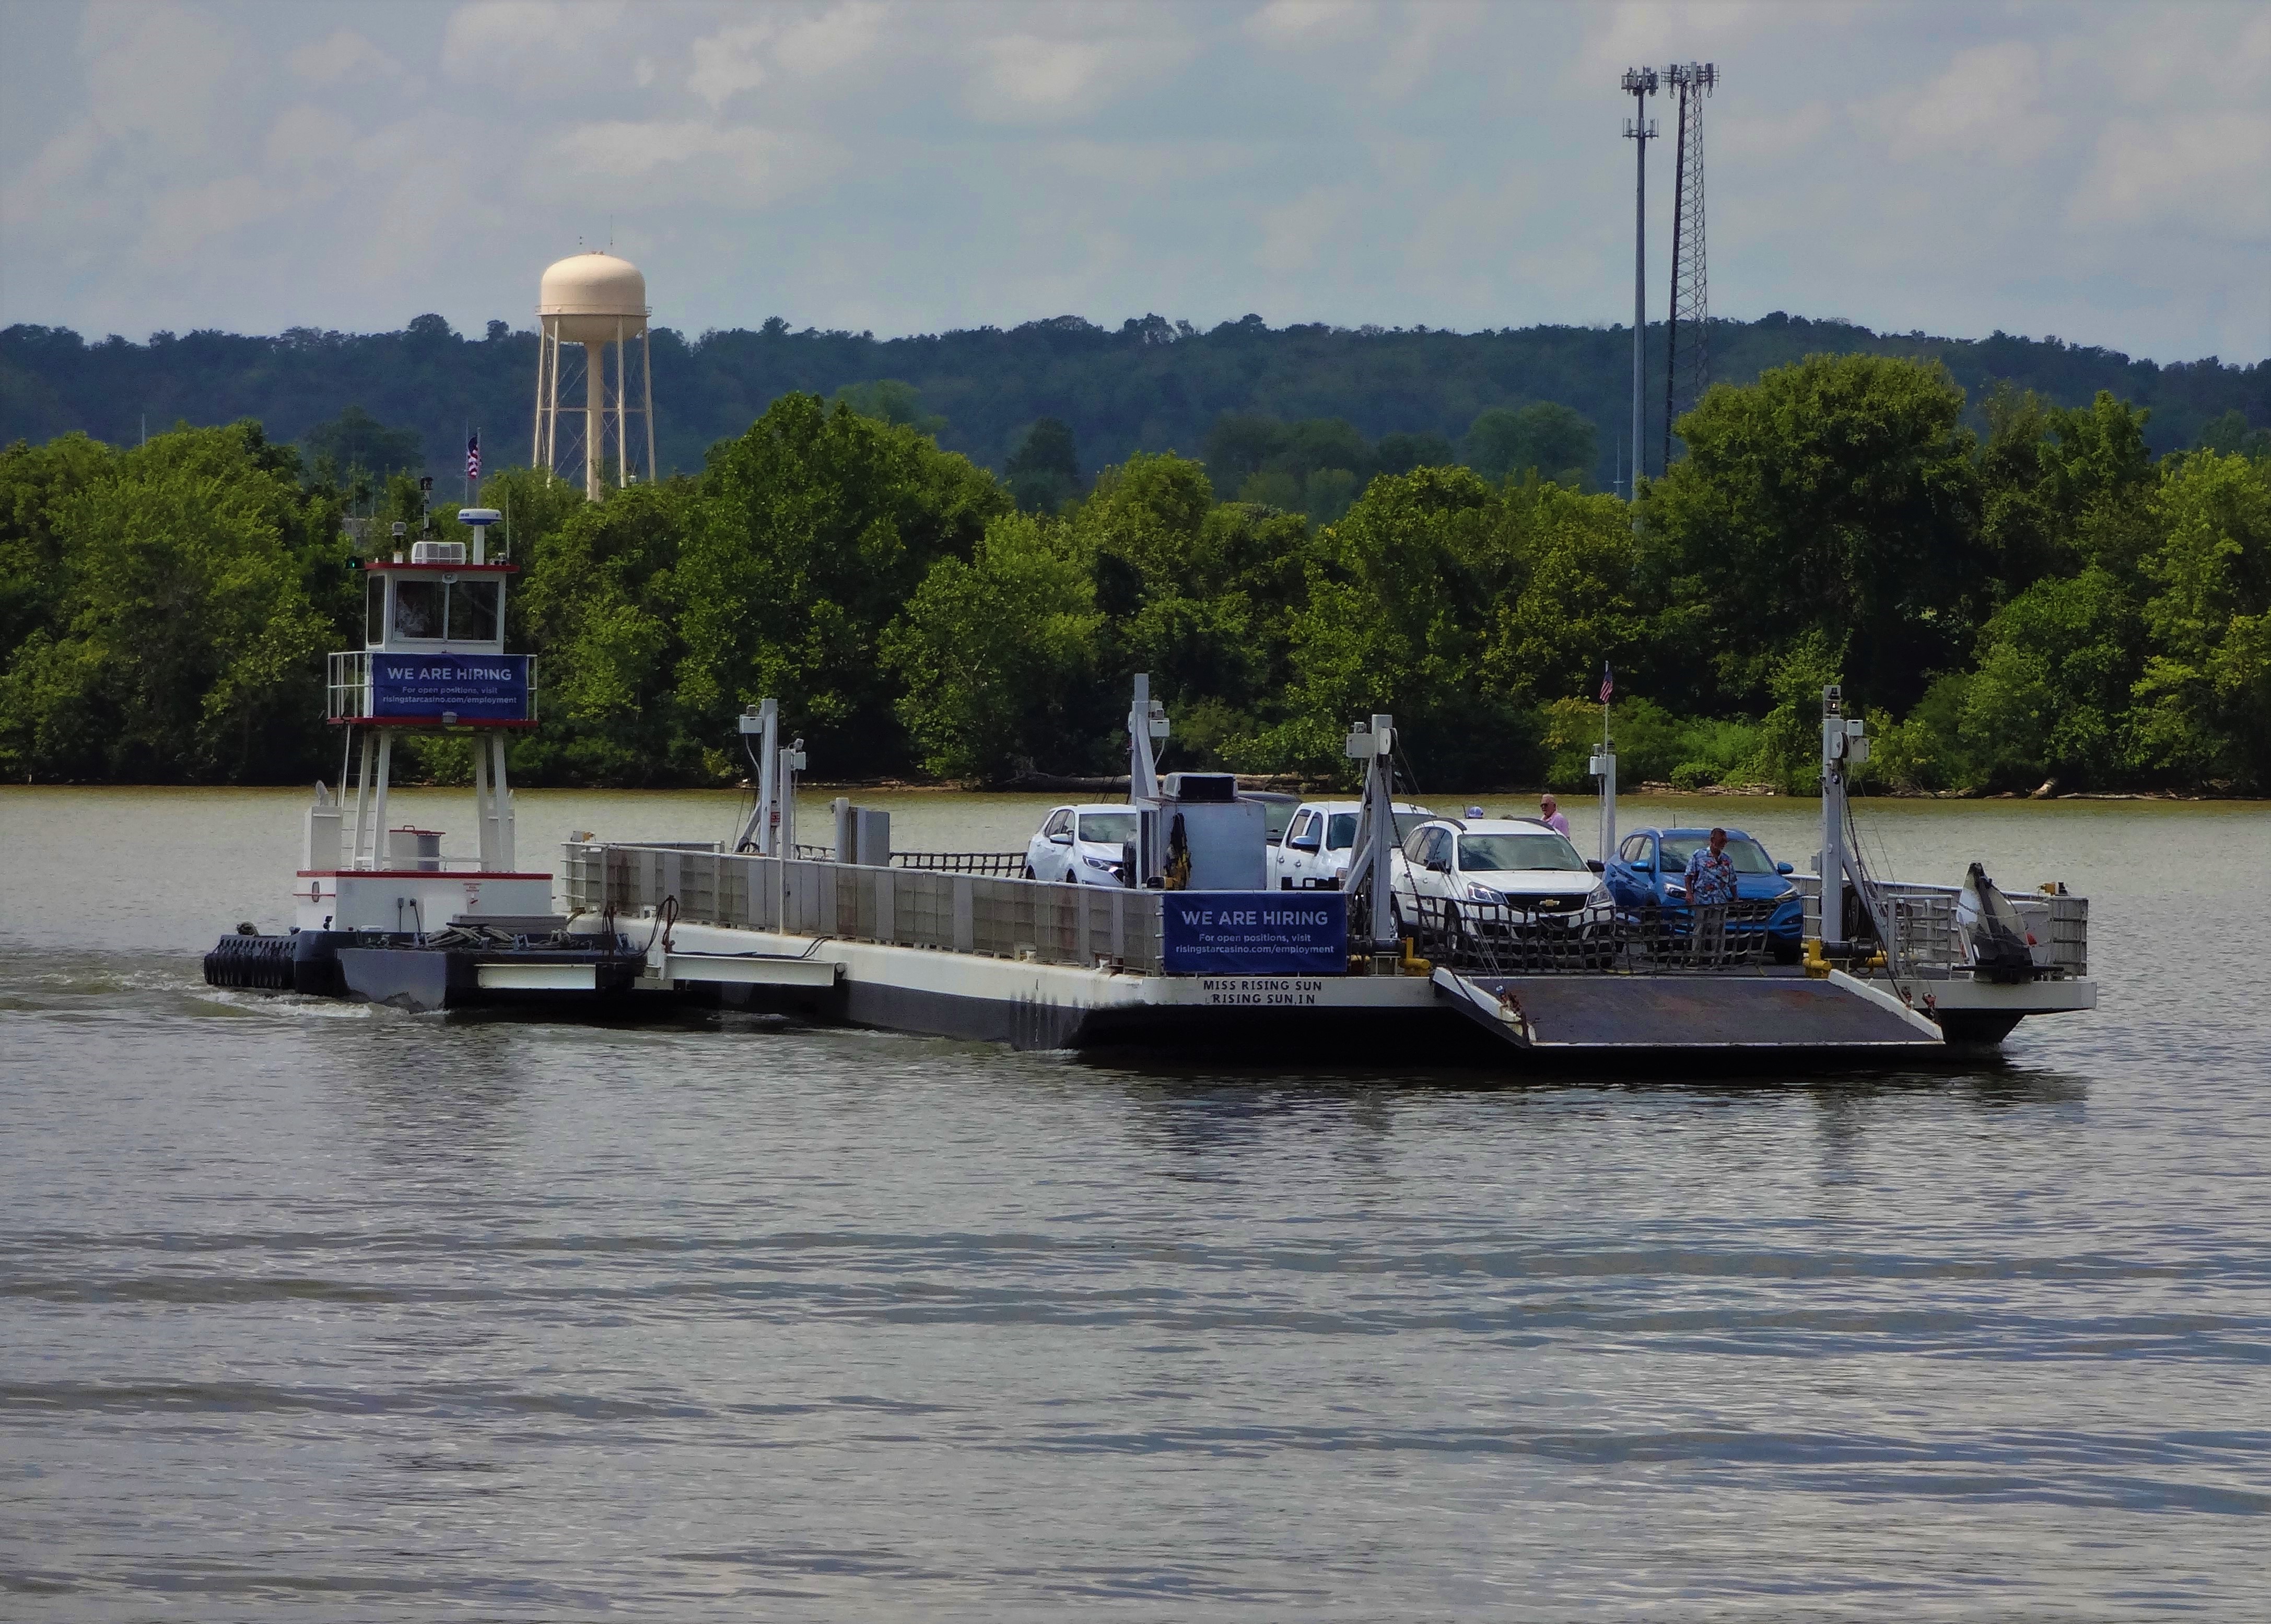 Rising Star Ferryboat ferrying vehicles across the Ohio River